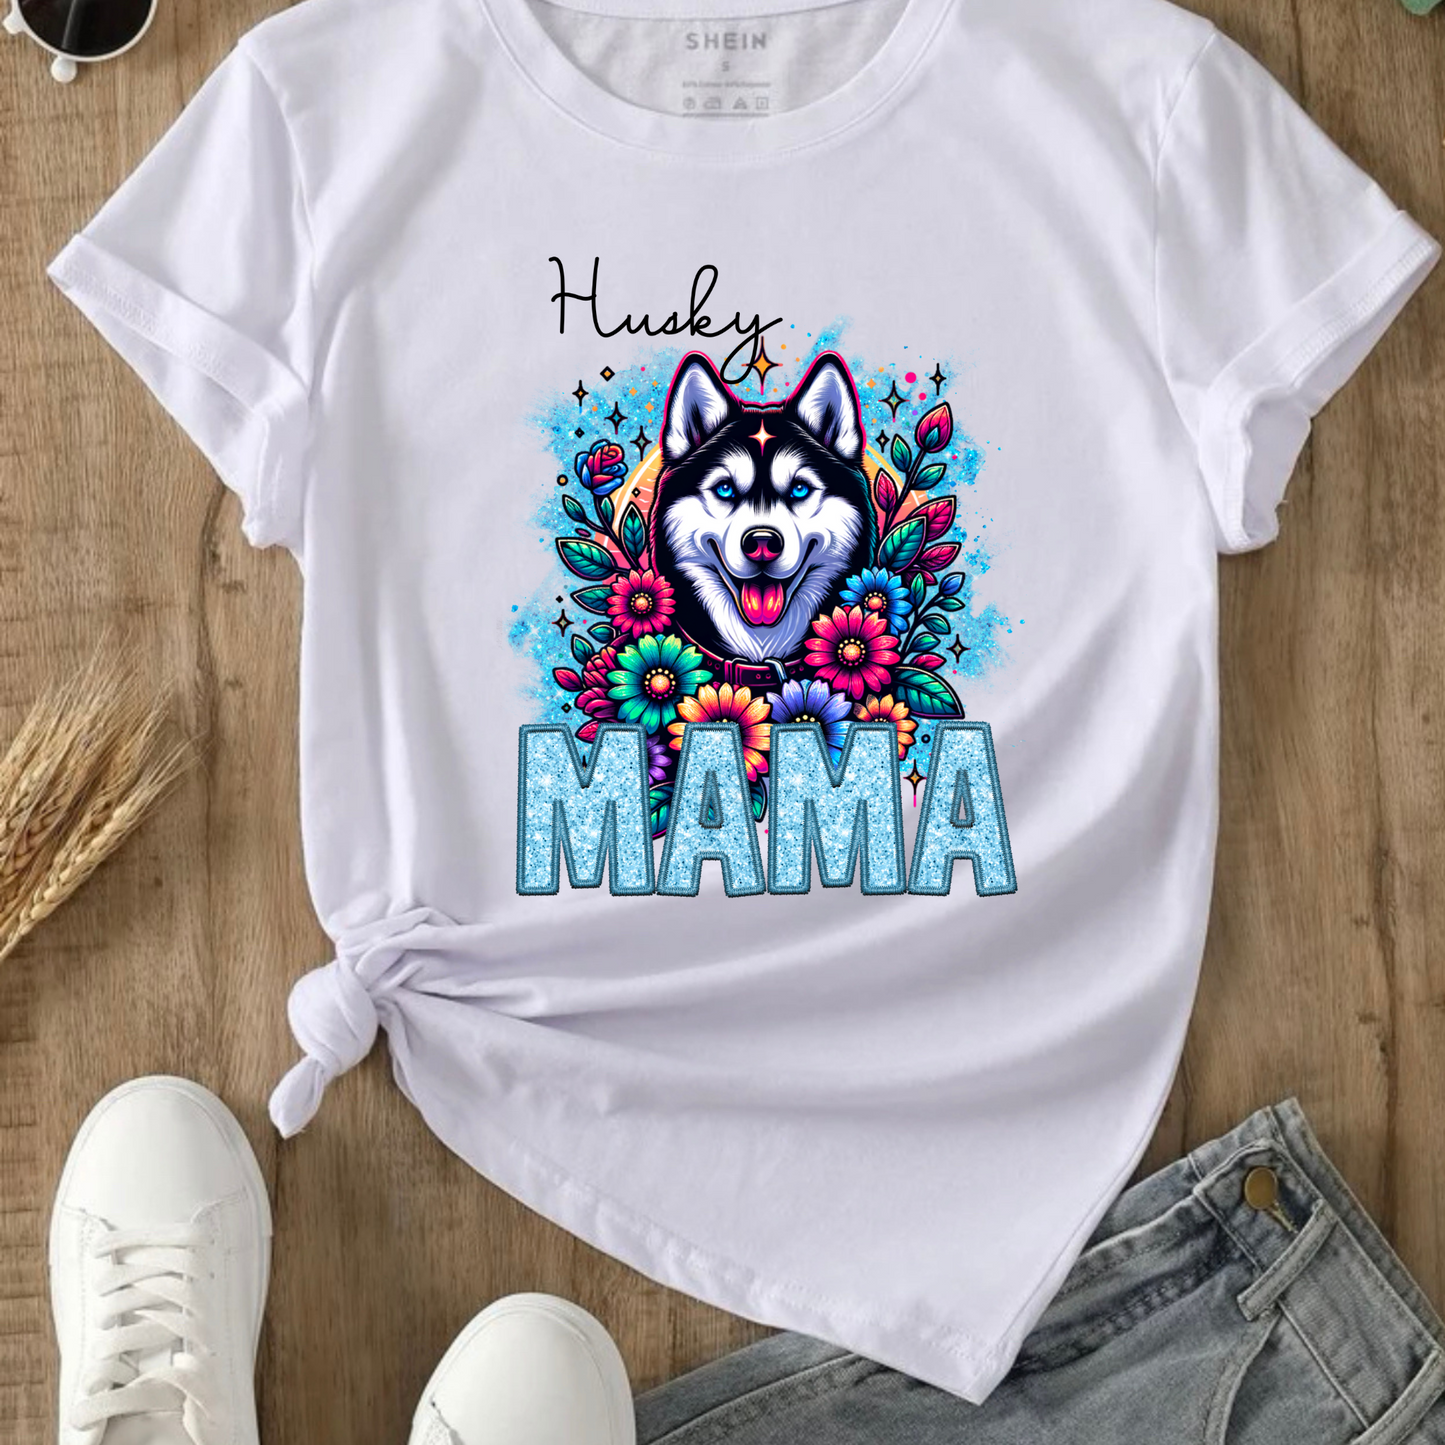 HUSKY MAMA DESIGN! YOU CHOOSE COLOR AND STYLE! TEE OR CREWNECK! BLEACHED OR NON-BLEACHED